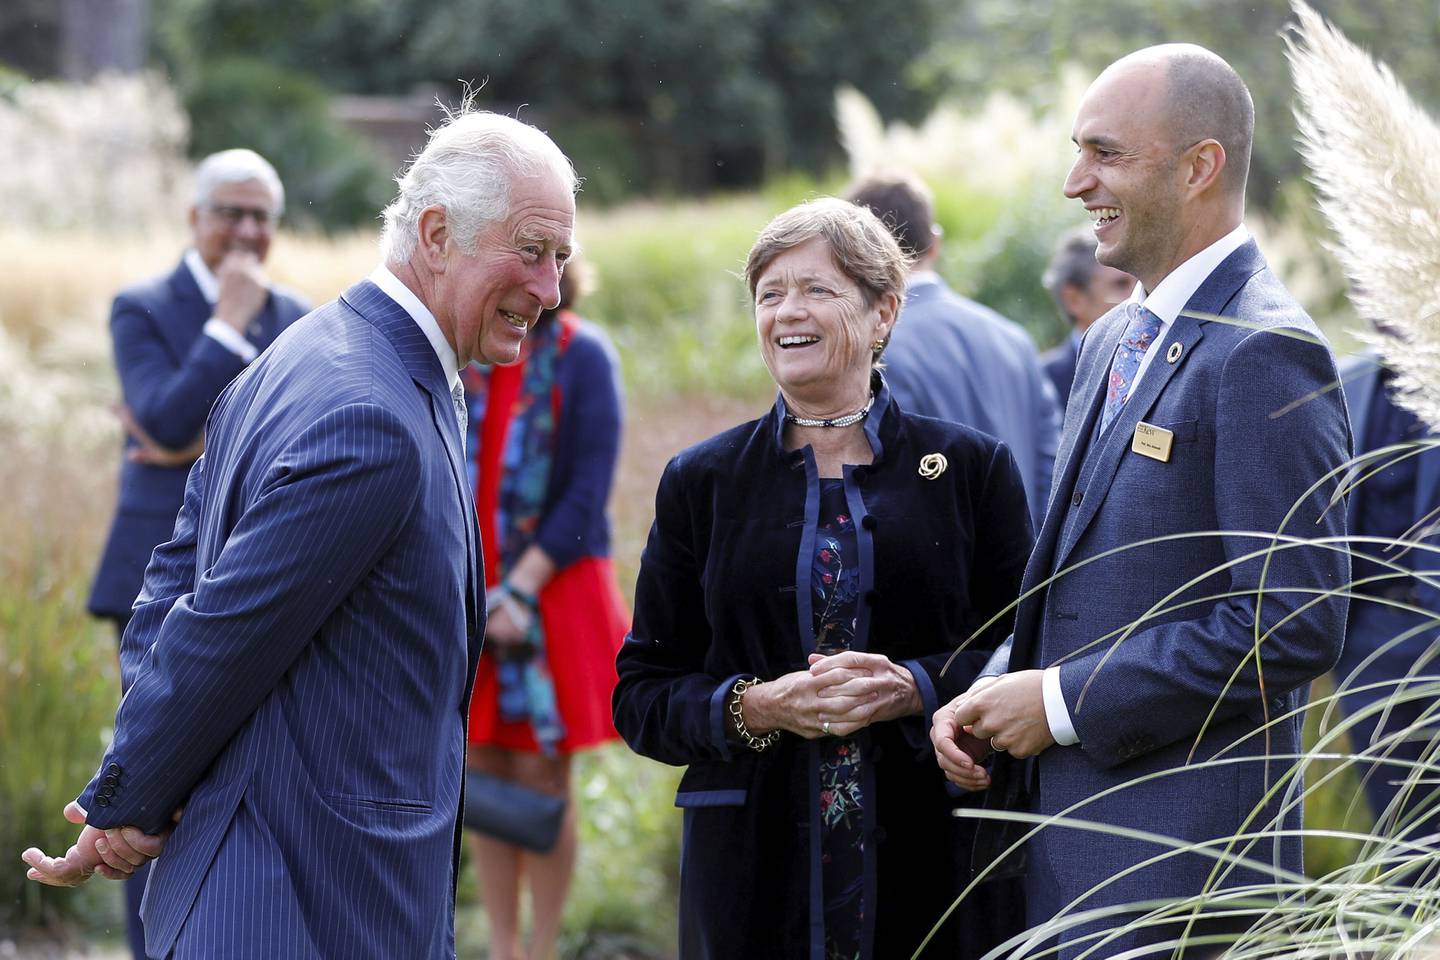 Prince Charles, pictured at the Royal Botanic Gardens Kew, has been an eco-warrior for decades. AP